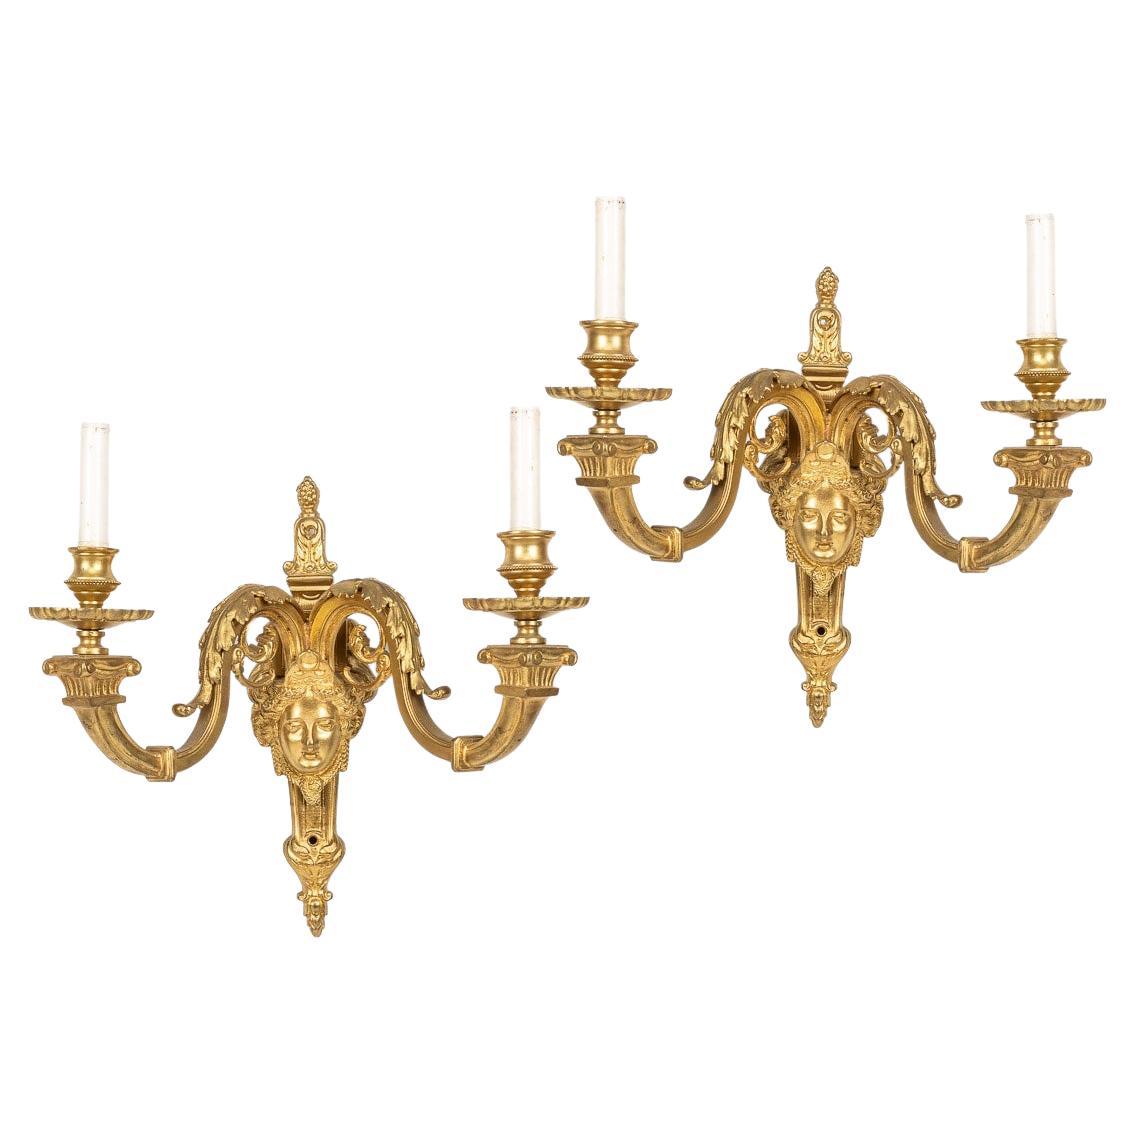 19th Century French Régence Style Ormolu D'appliques Wall Lights, C.1830 For Sale